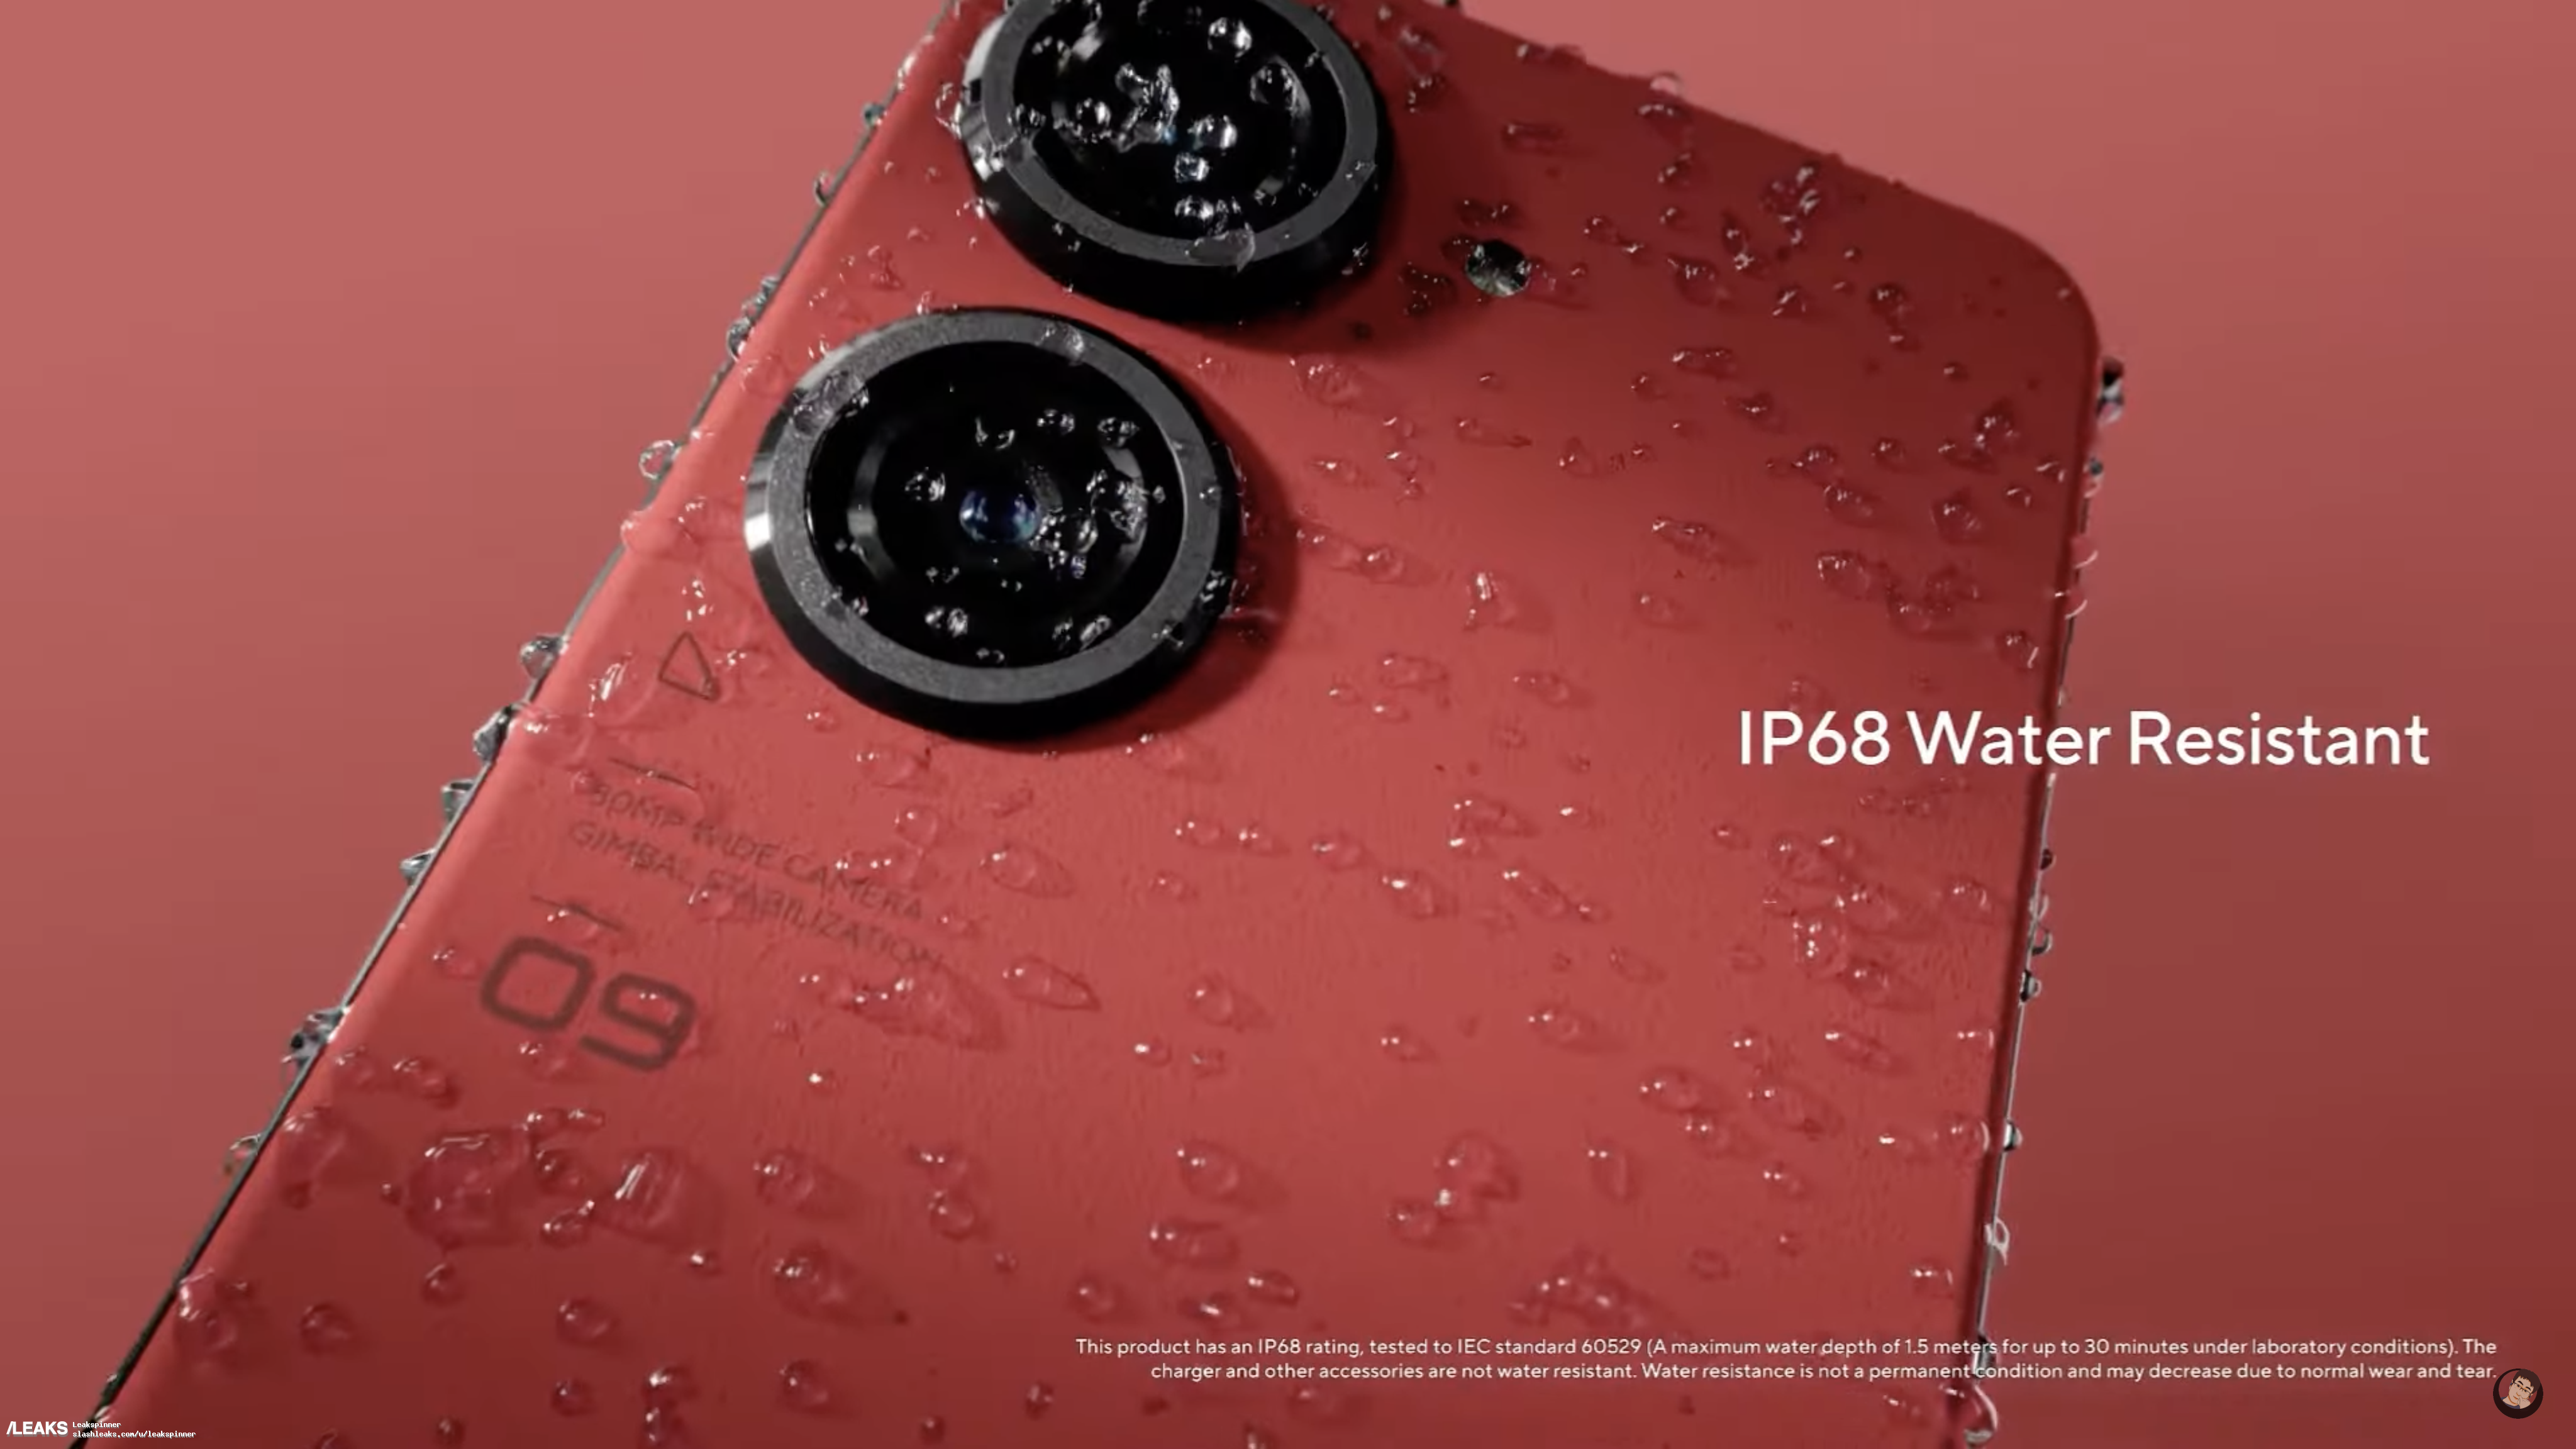 asus-zenfone-9-promo-video-leaks-out-key-specs-revealed-104.png